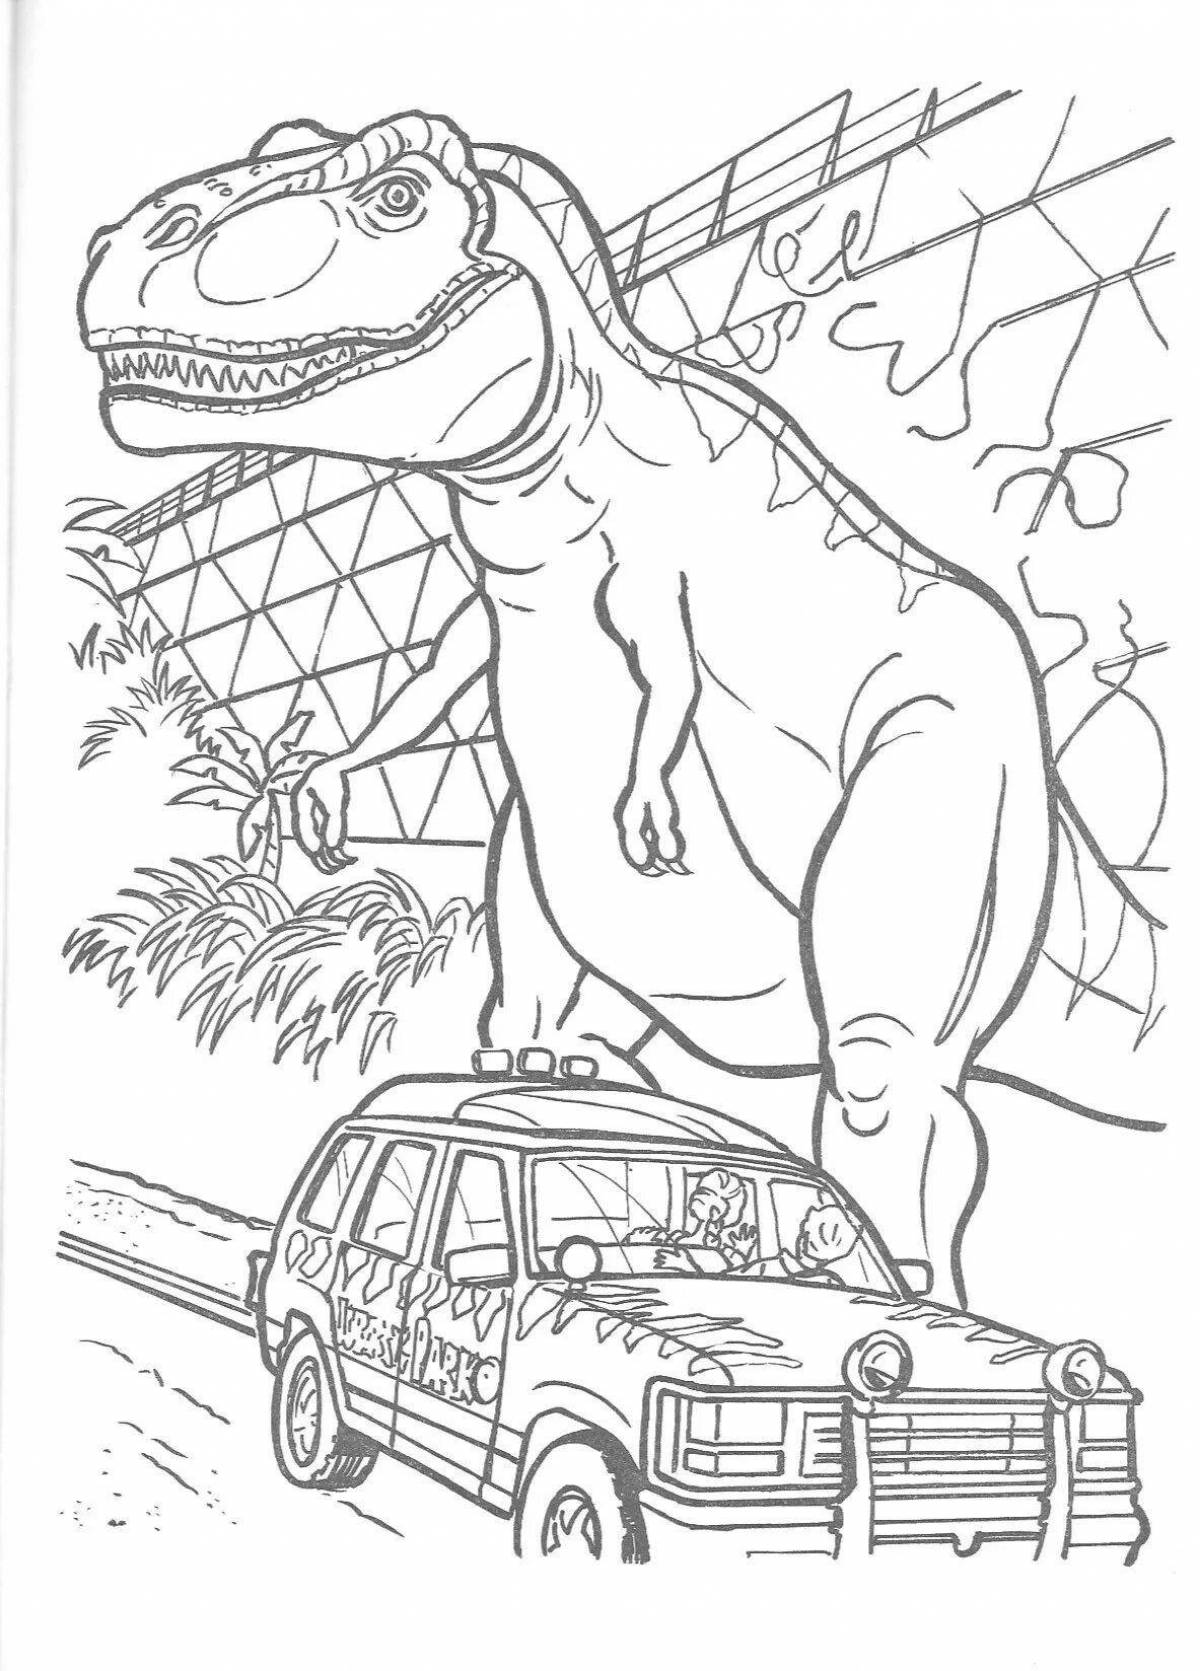 Jurassic world domination colorfully illustrated coloring book